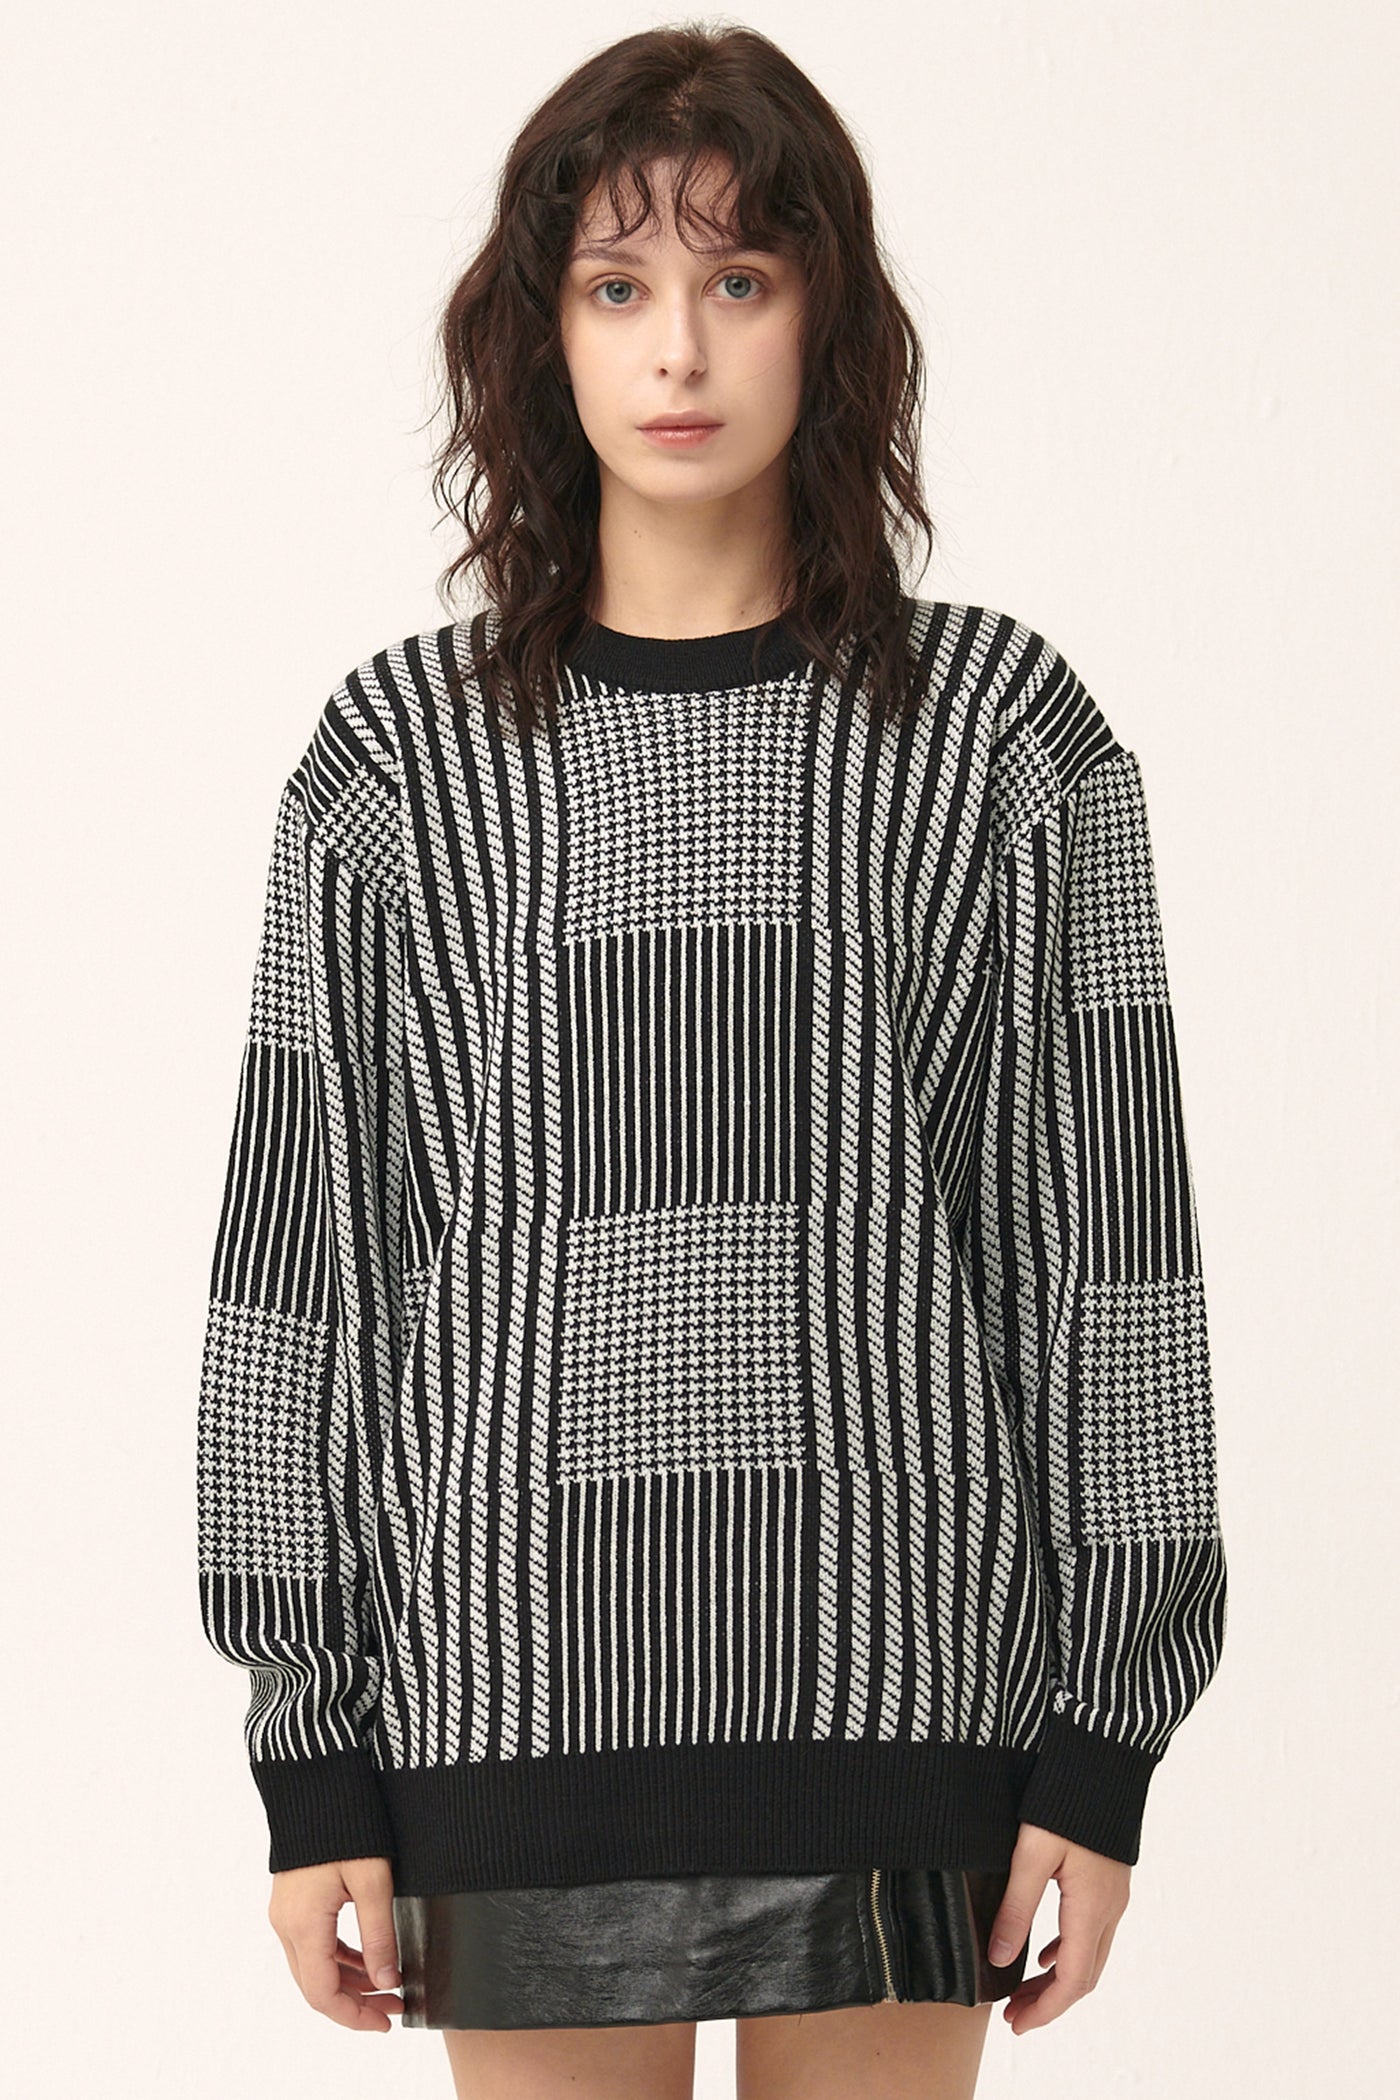 storets.com [NEW] Madison Sweater in Plaid